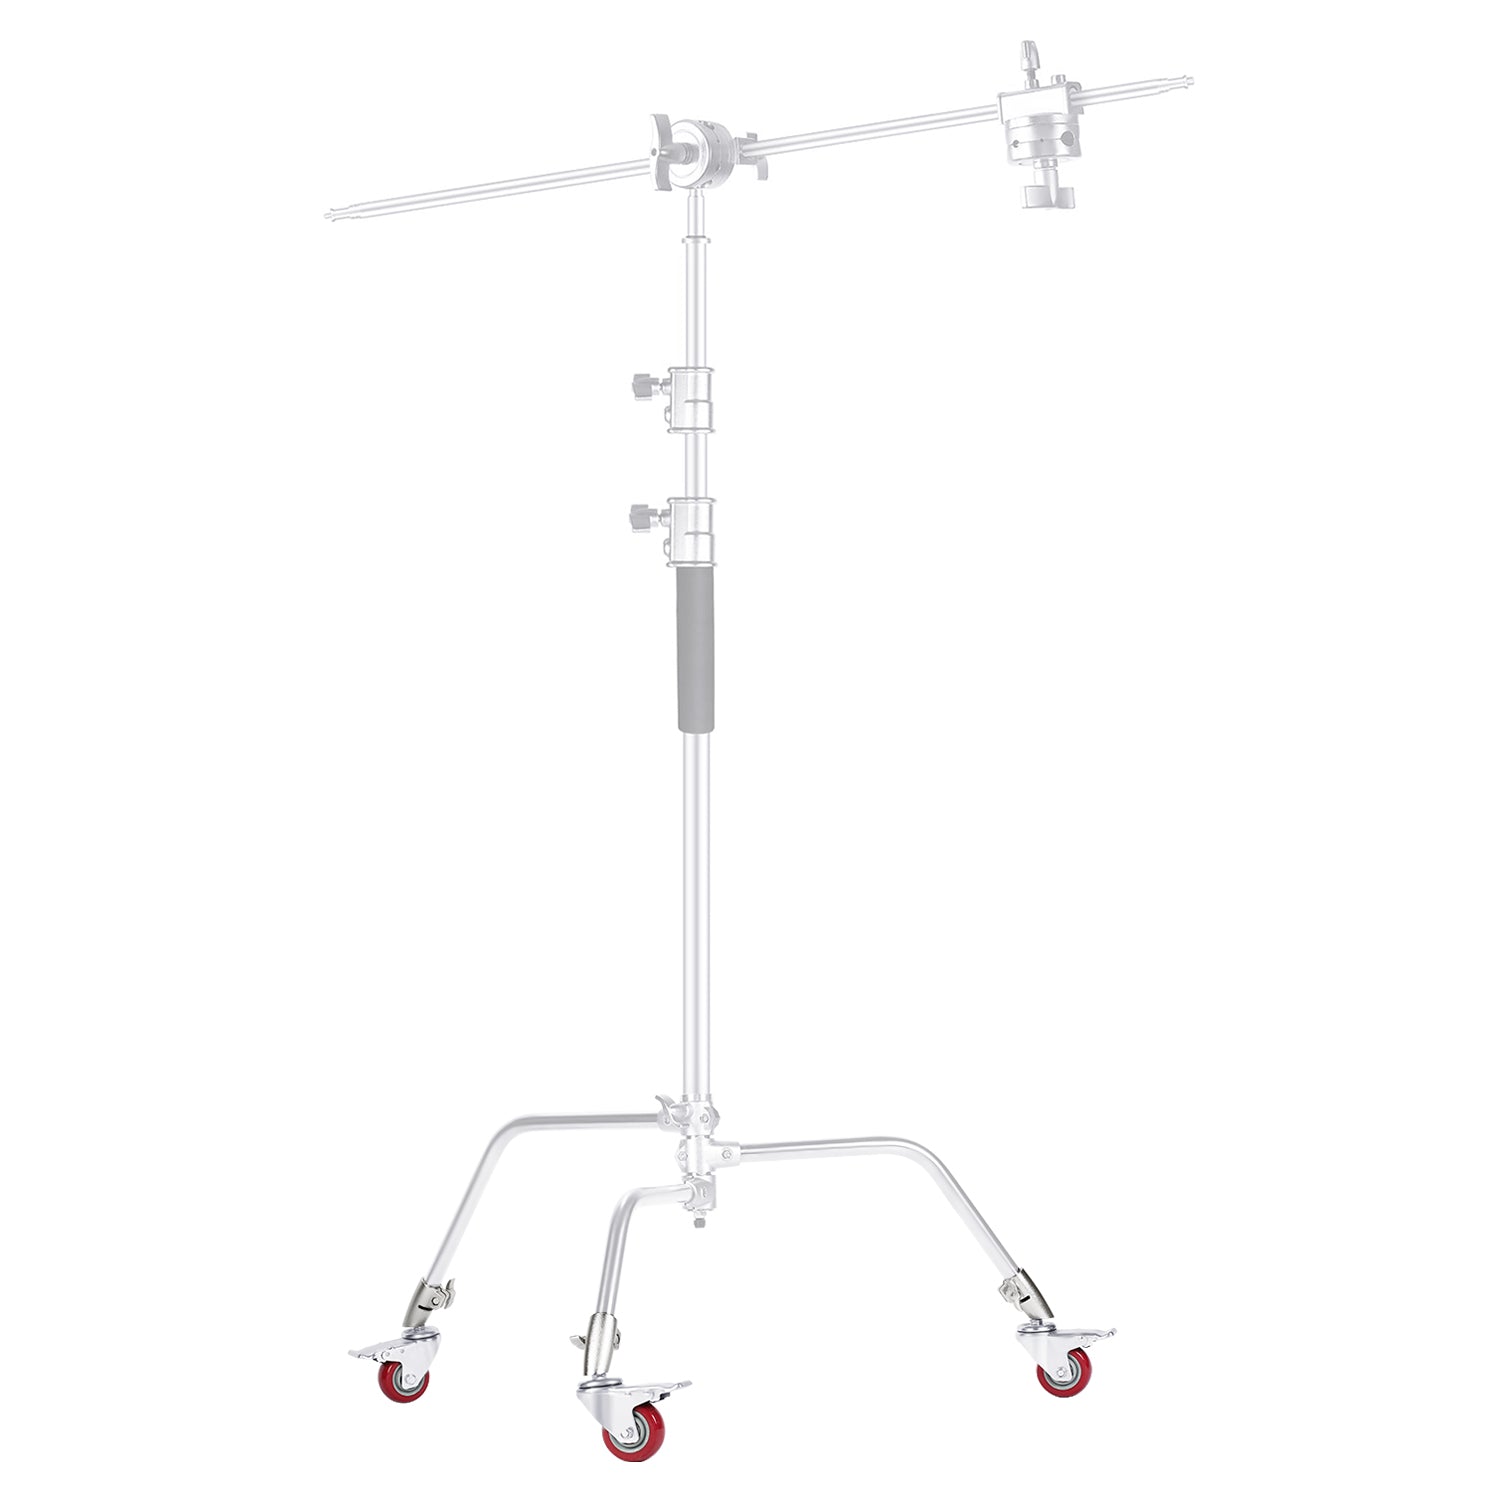 NEEWER C Stand with Boom Arm & Sliding Legs, Pro 100% Stainless Steel Stand  Max Height 10.13ft/309cm with 3.9ft/120cm Arm & 2 Grip Heads for